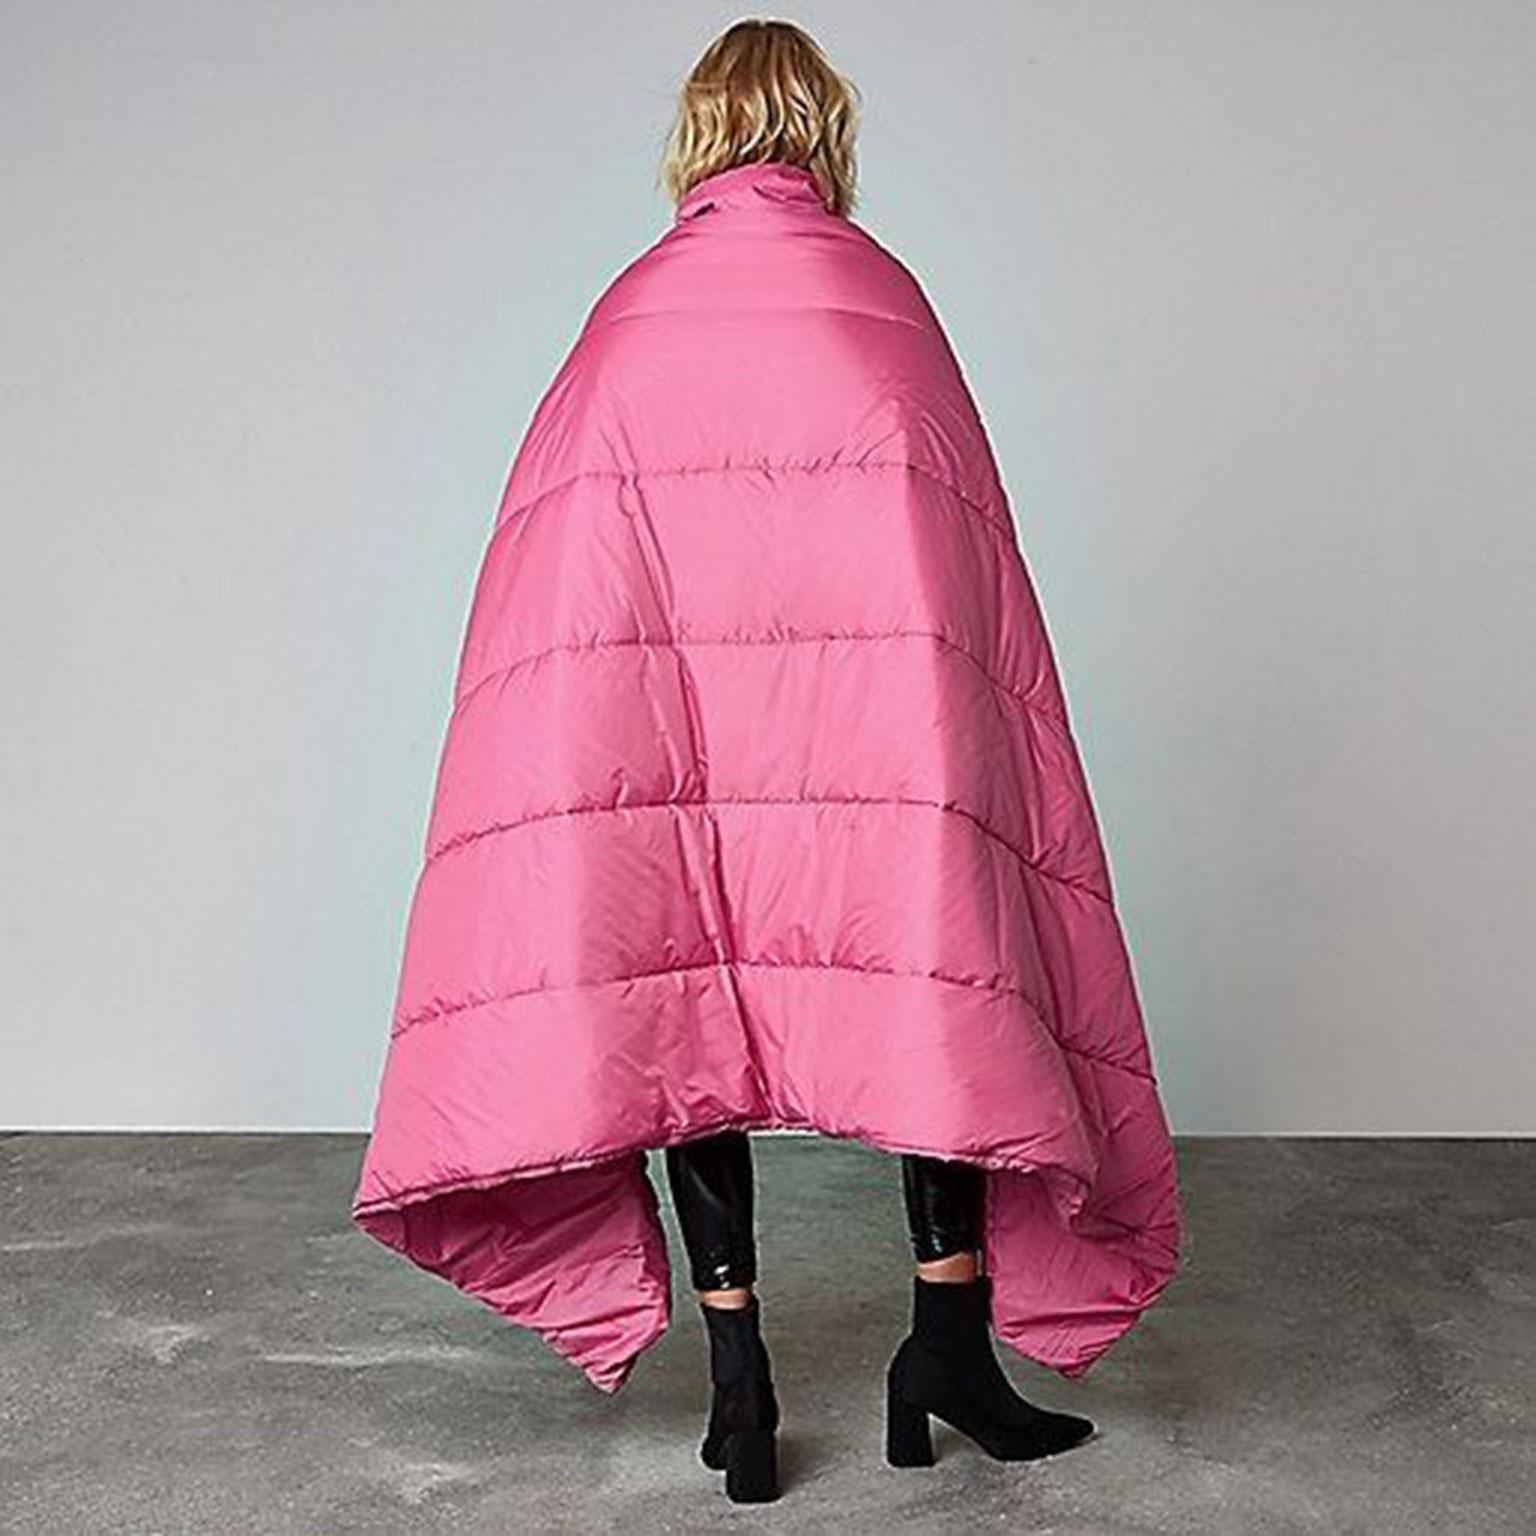 The coat is part of a collection by Ashish for River Island (River Island/Ashish )